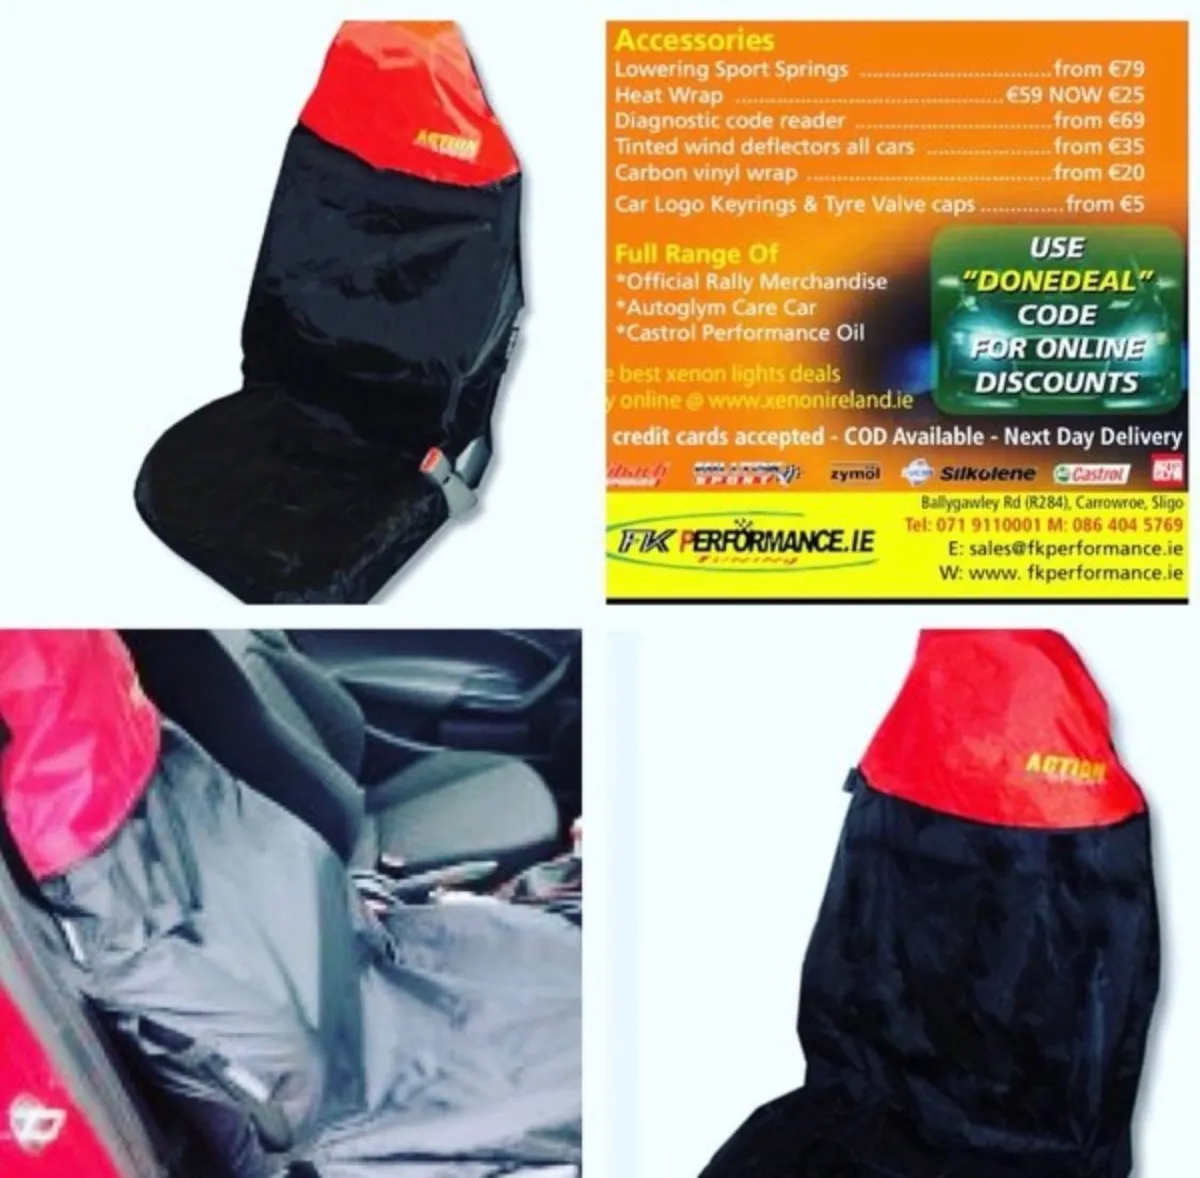 Ultimate action sport seat covers - Image 1